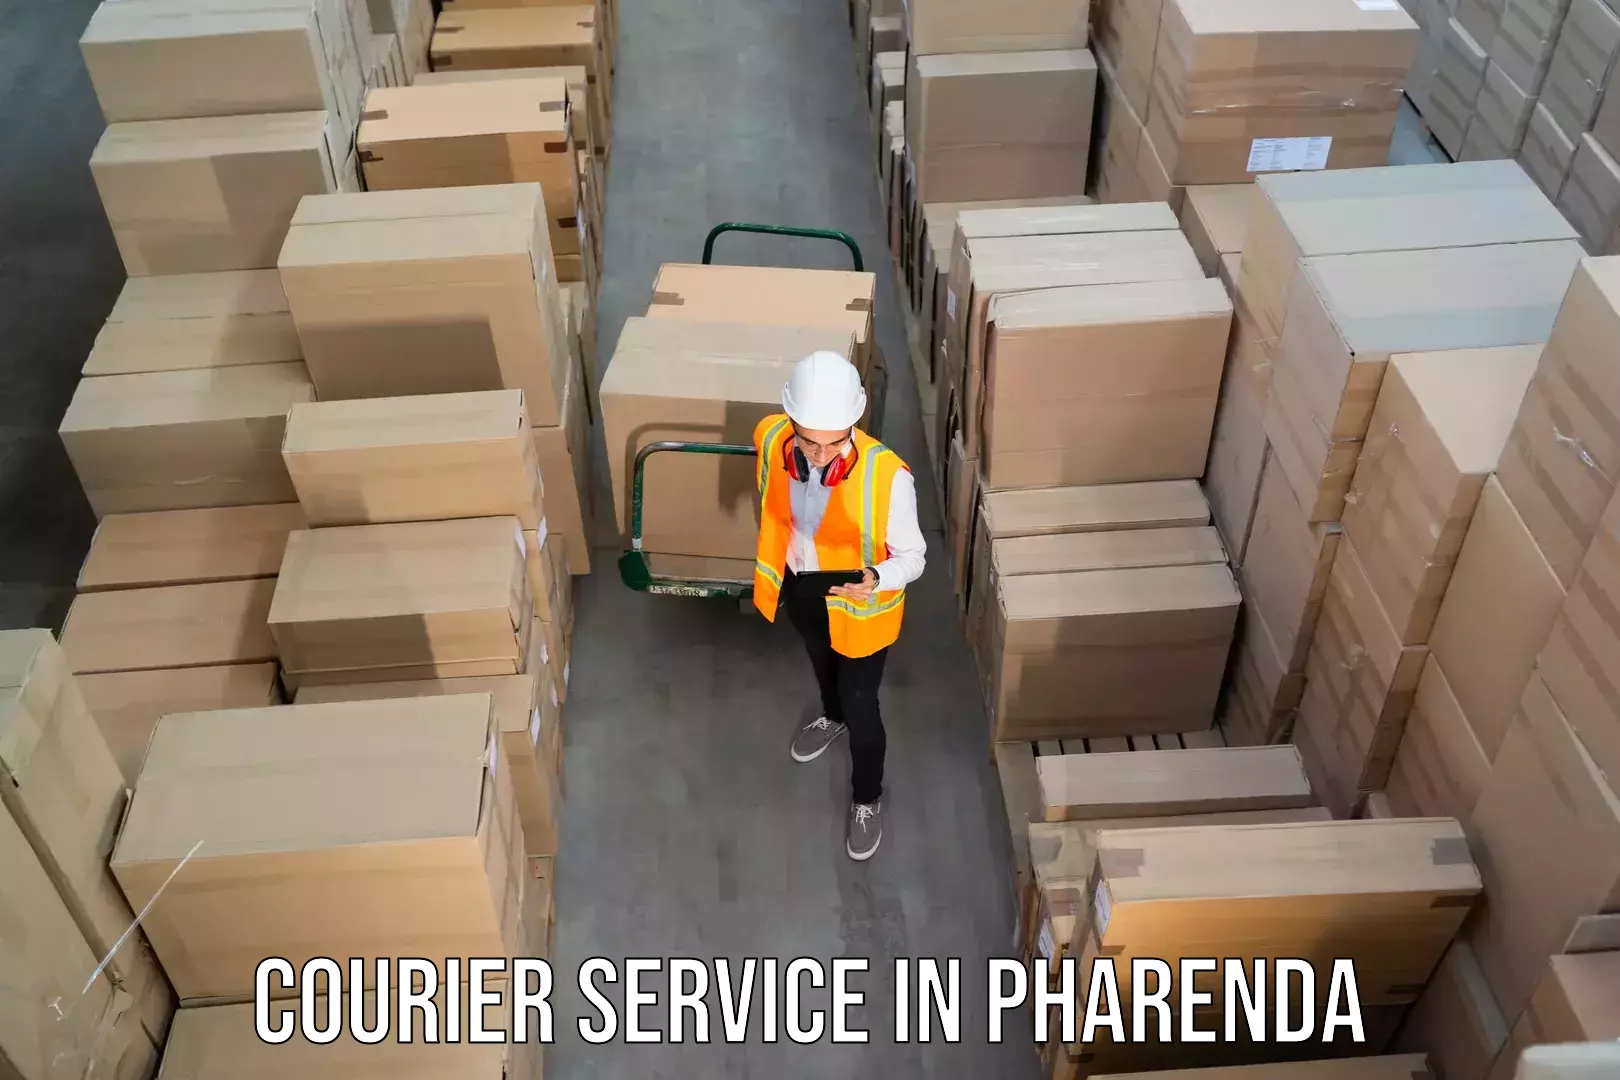 Enhanced delivery experience in Pharenda